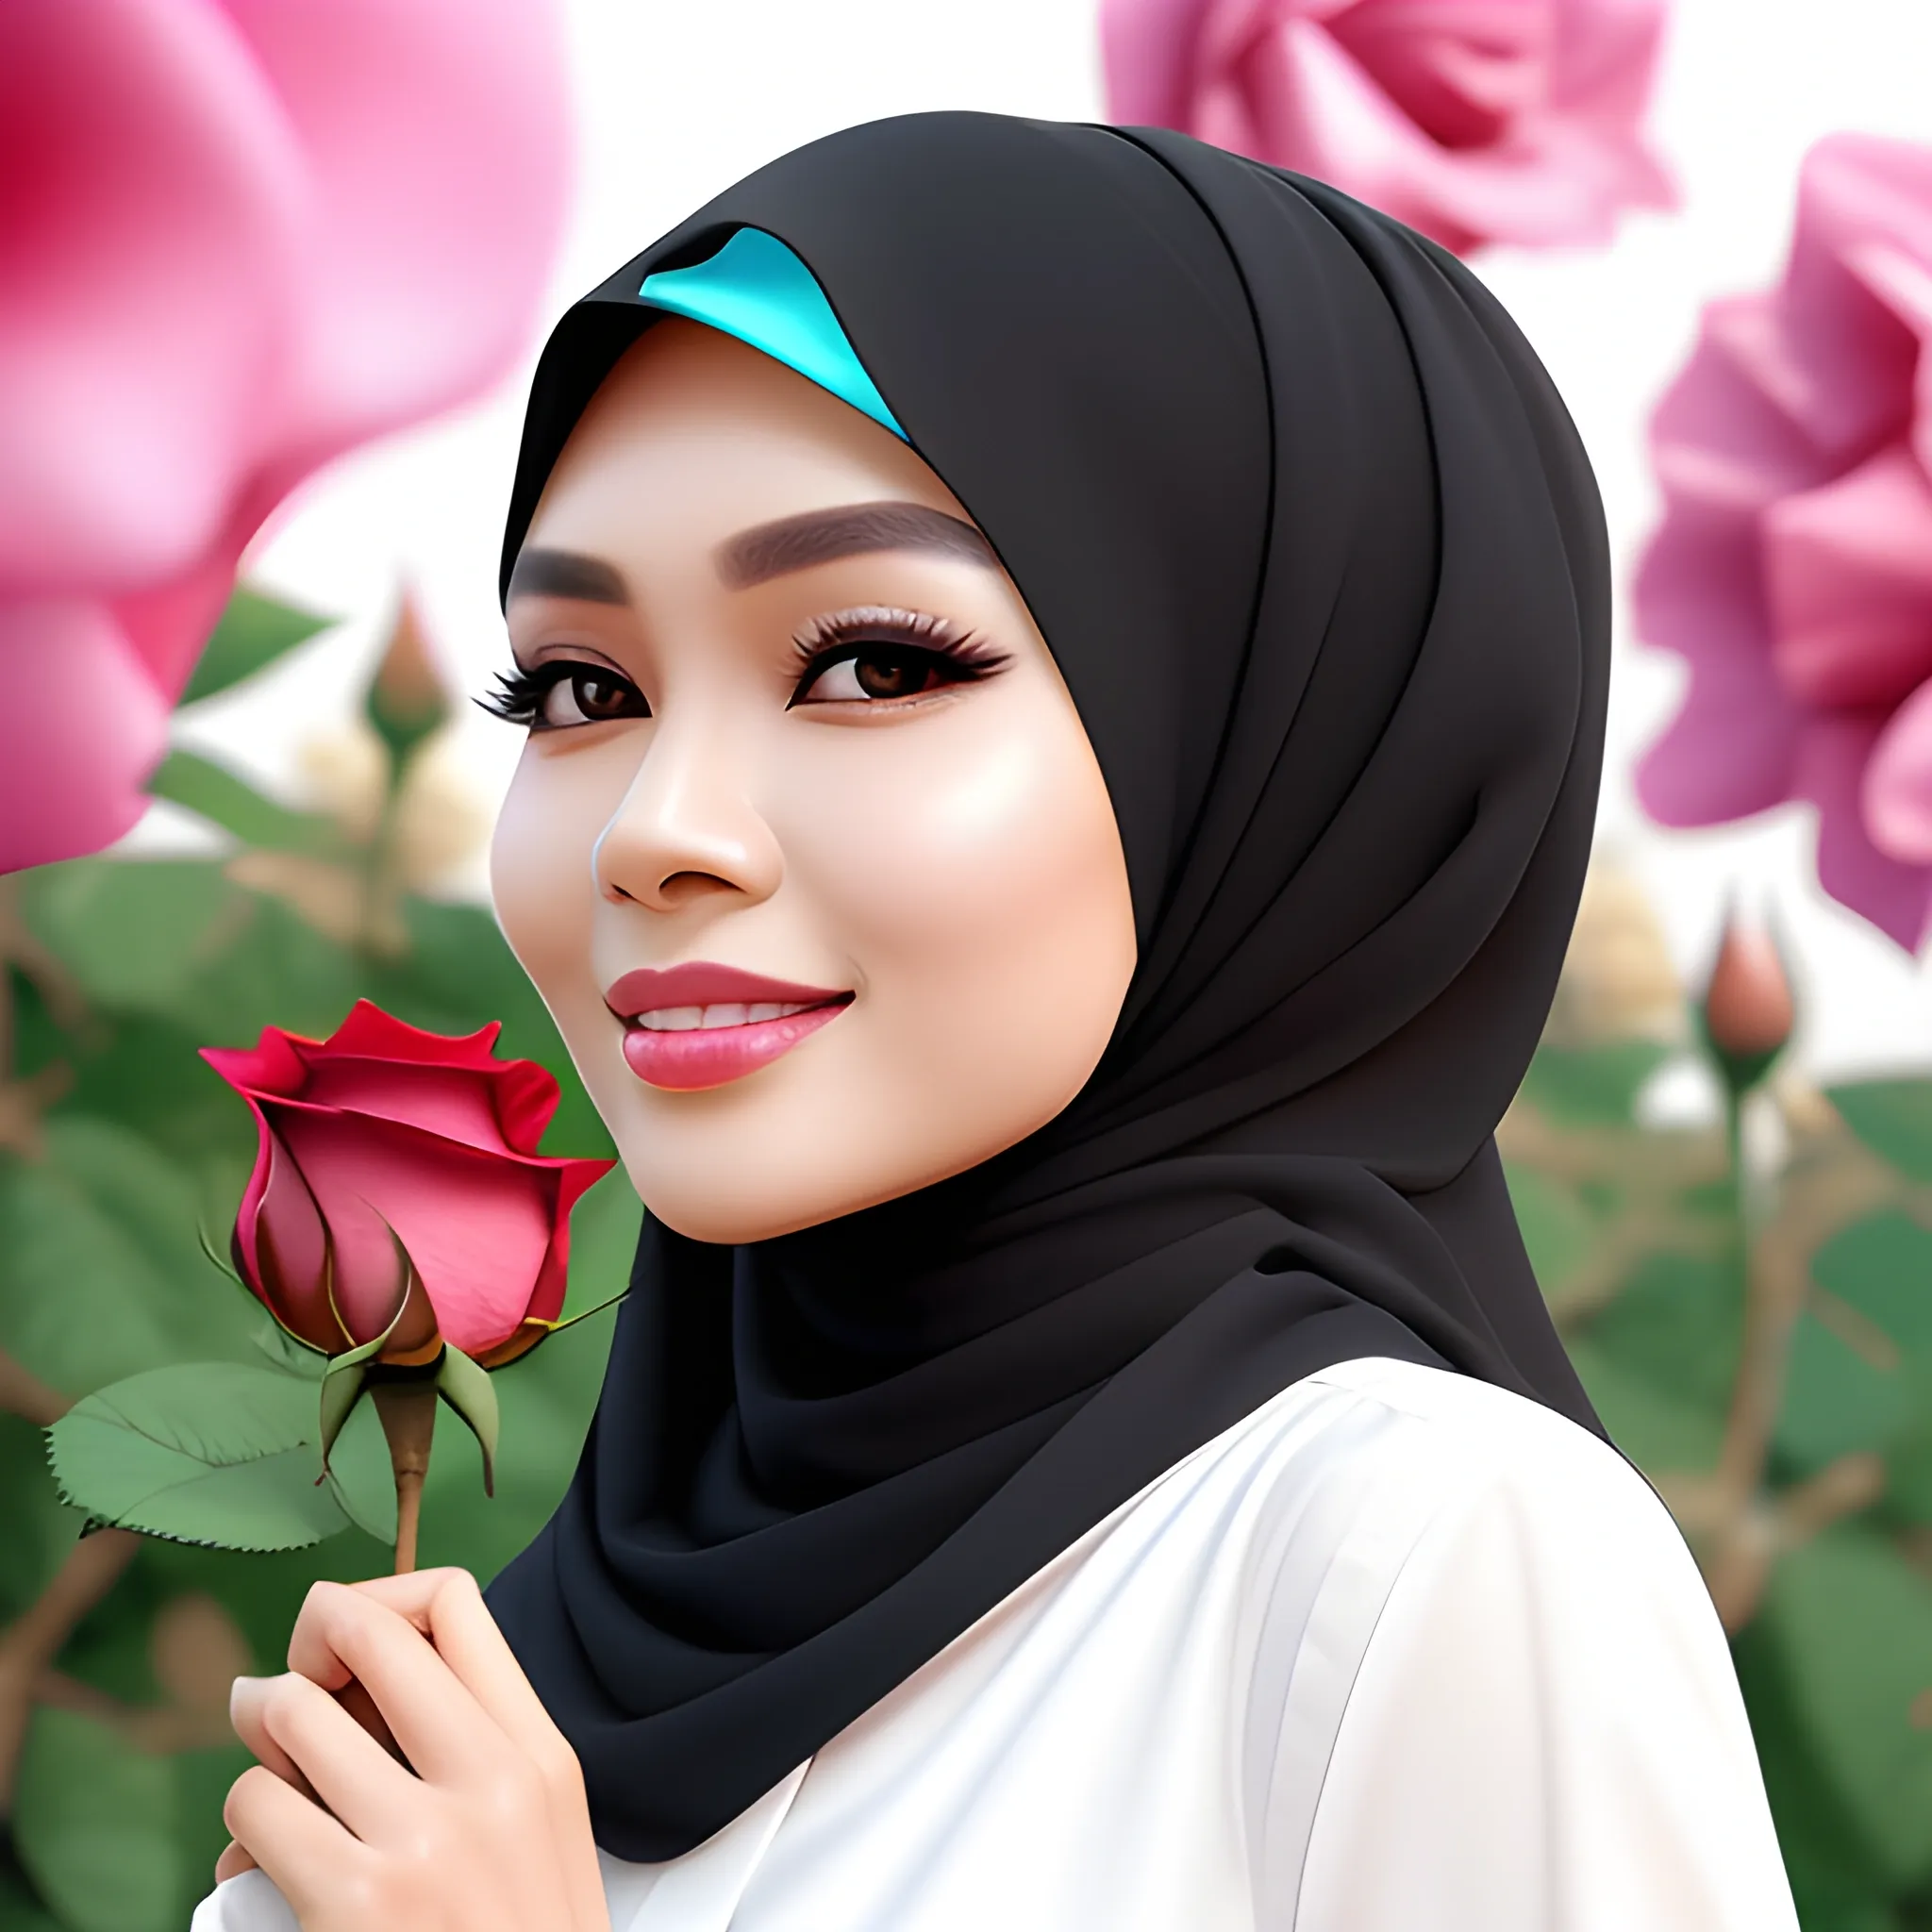 pretty women indonesian, elegant, very happy, face detail, sharp nose, black eyes, wearing black hijab, cream shirt casual, beside the rose flowers, her head Turned at camera, 4k